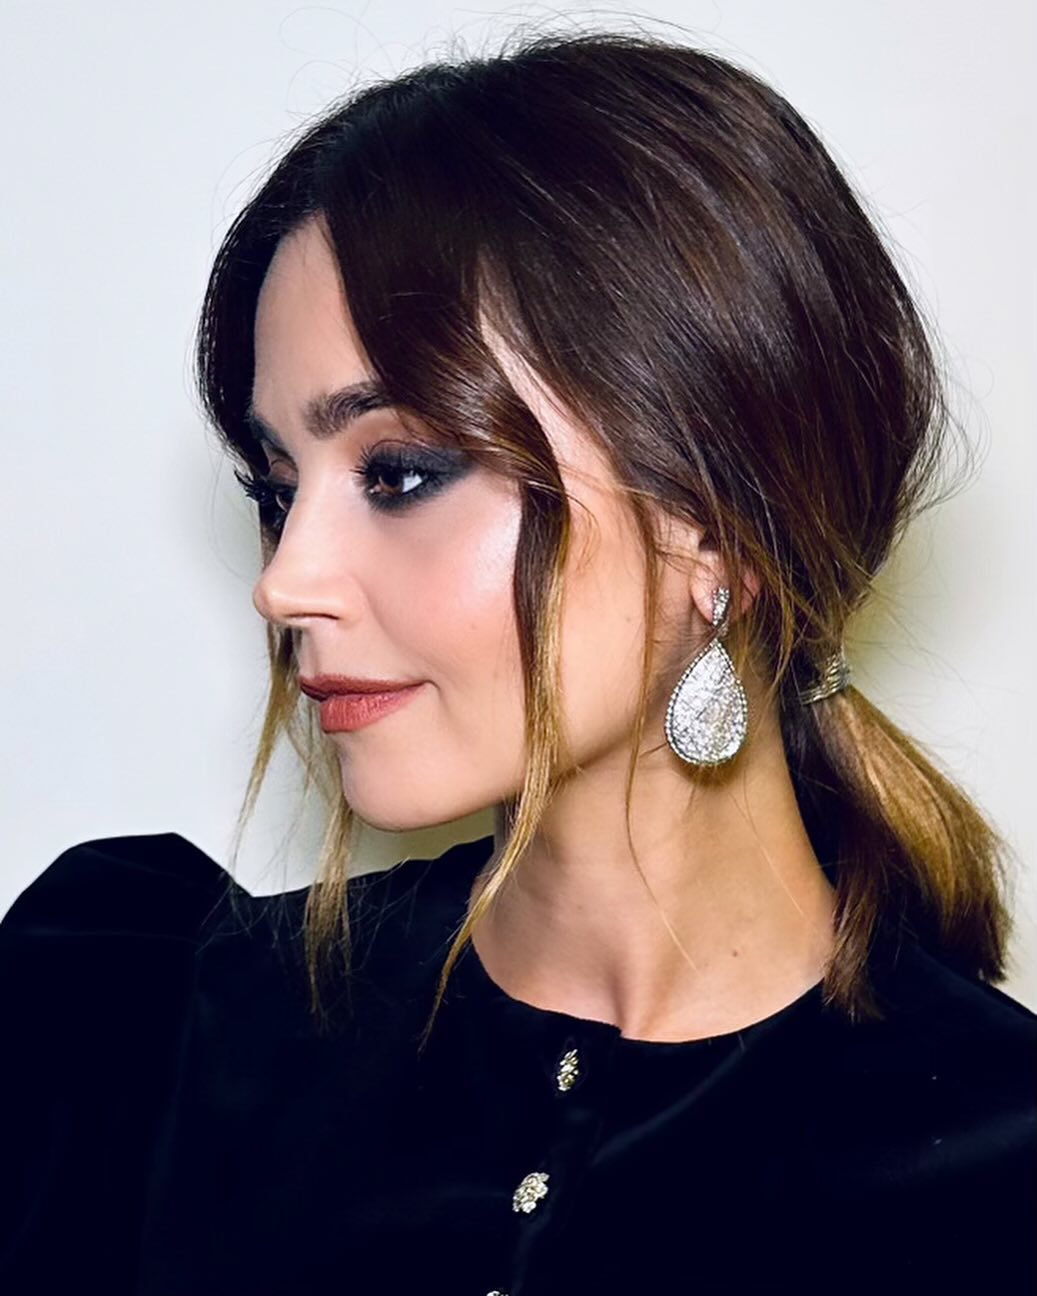 Jenna Coleman Biography: Husband, Height, Age, Movies, Net Worth, Parents, Brothers